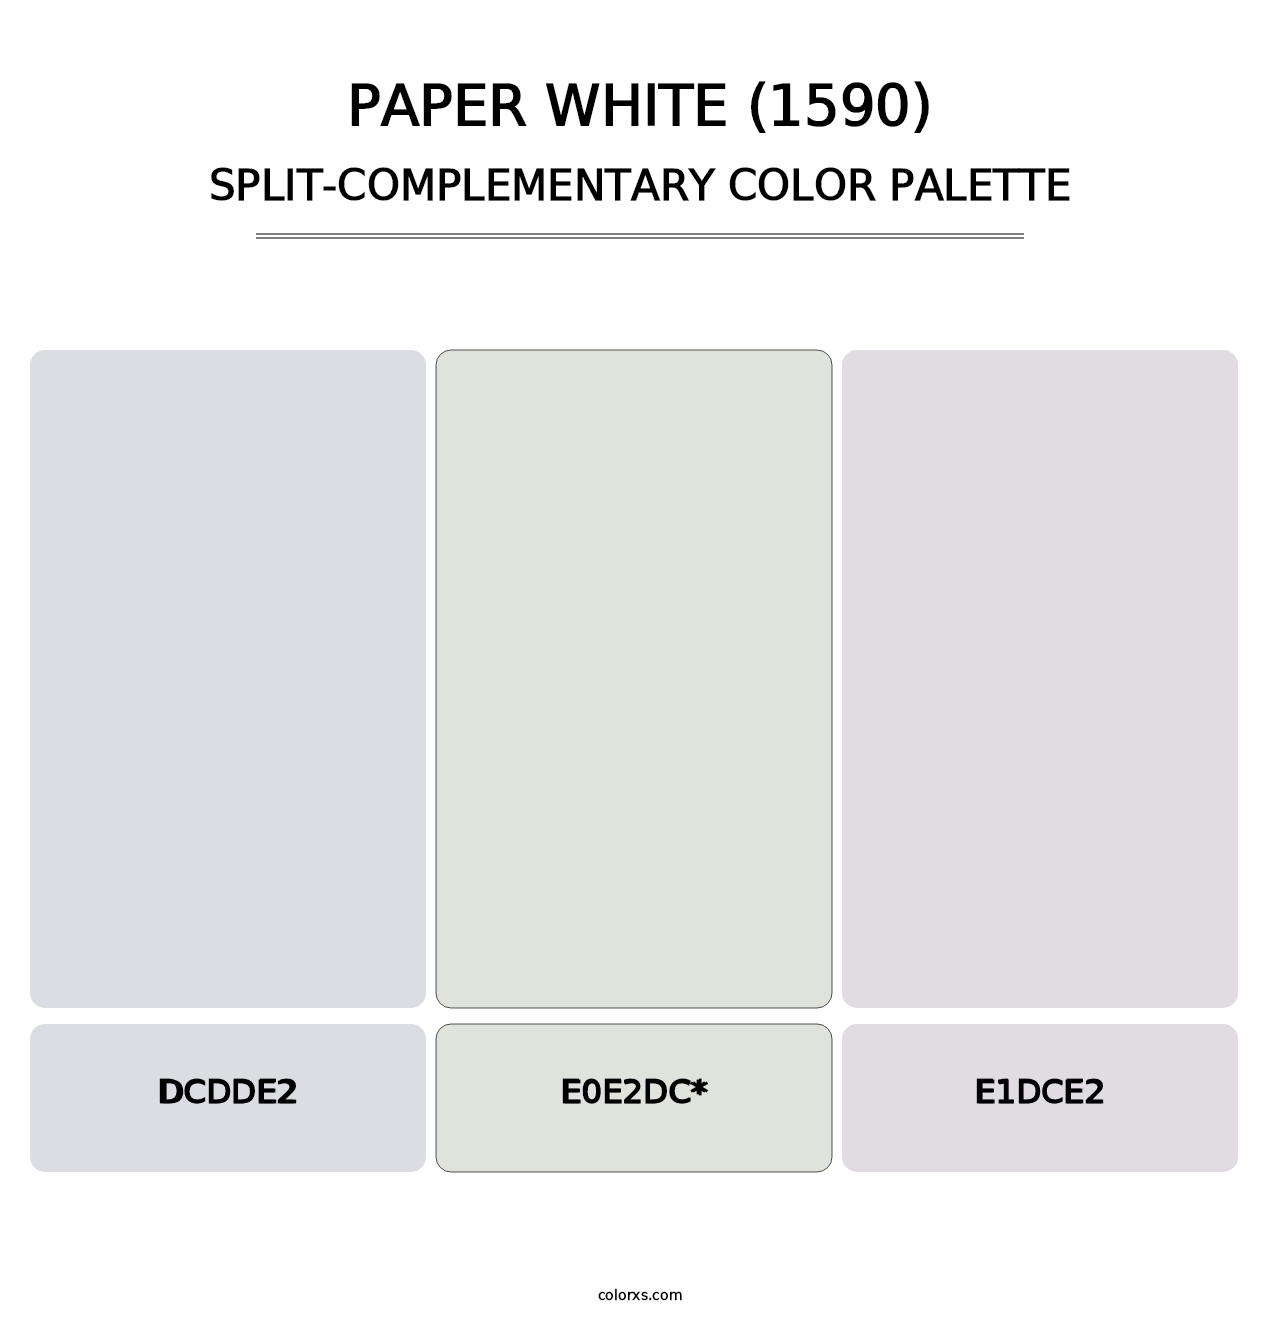 Paper White (1590) - Split-Complementary Color Palette